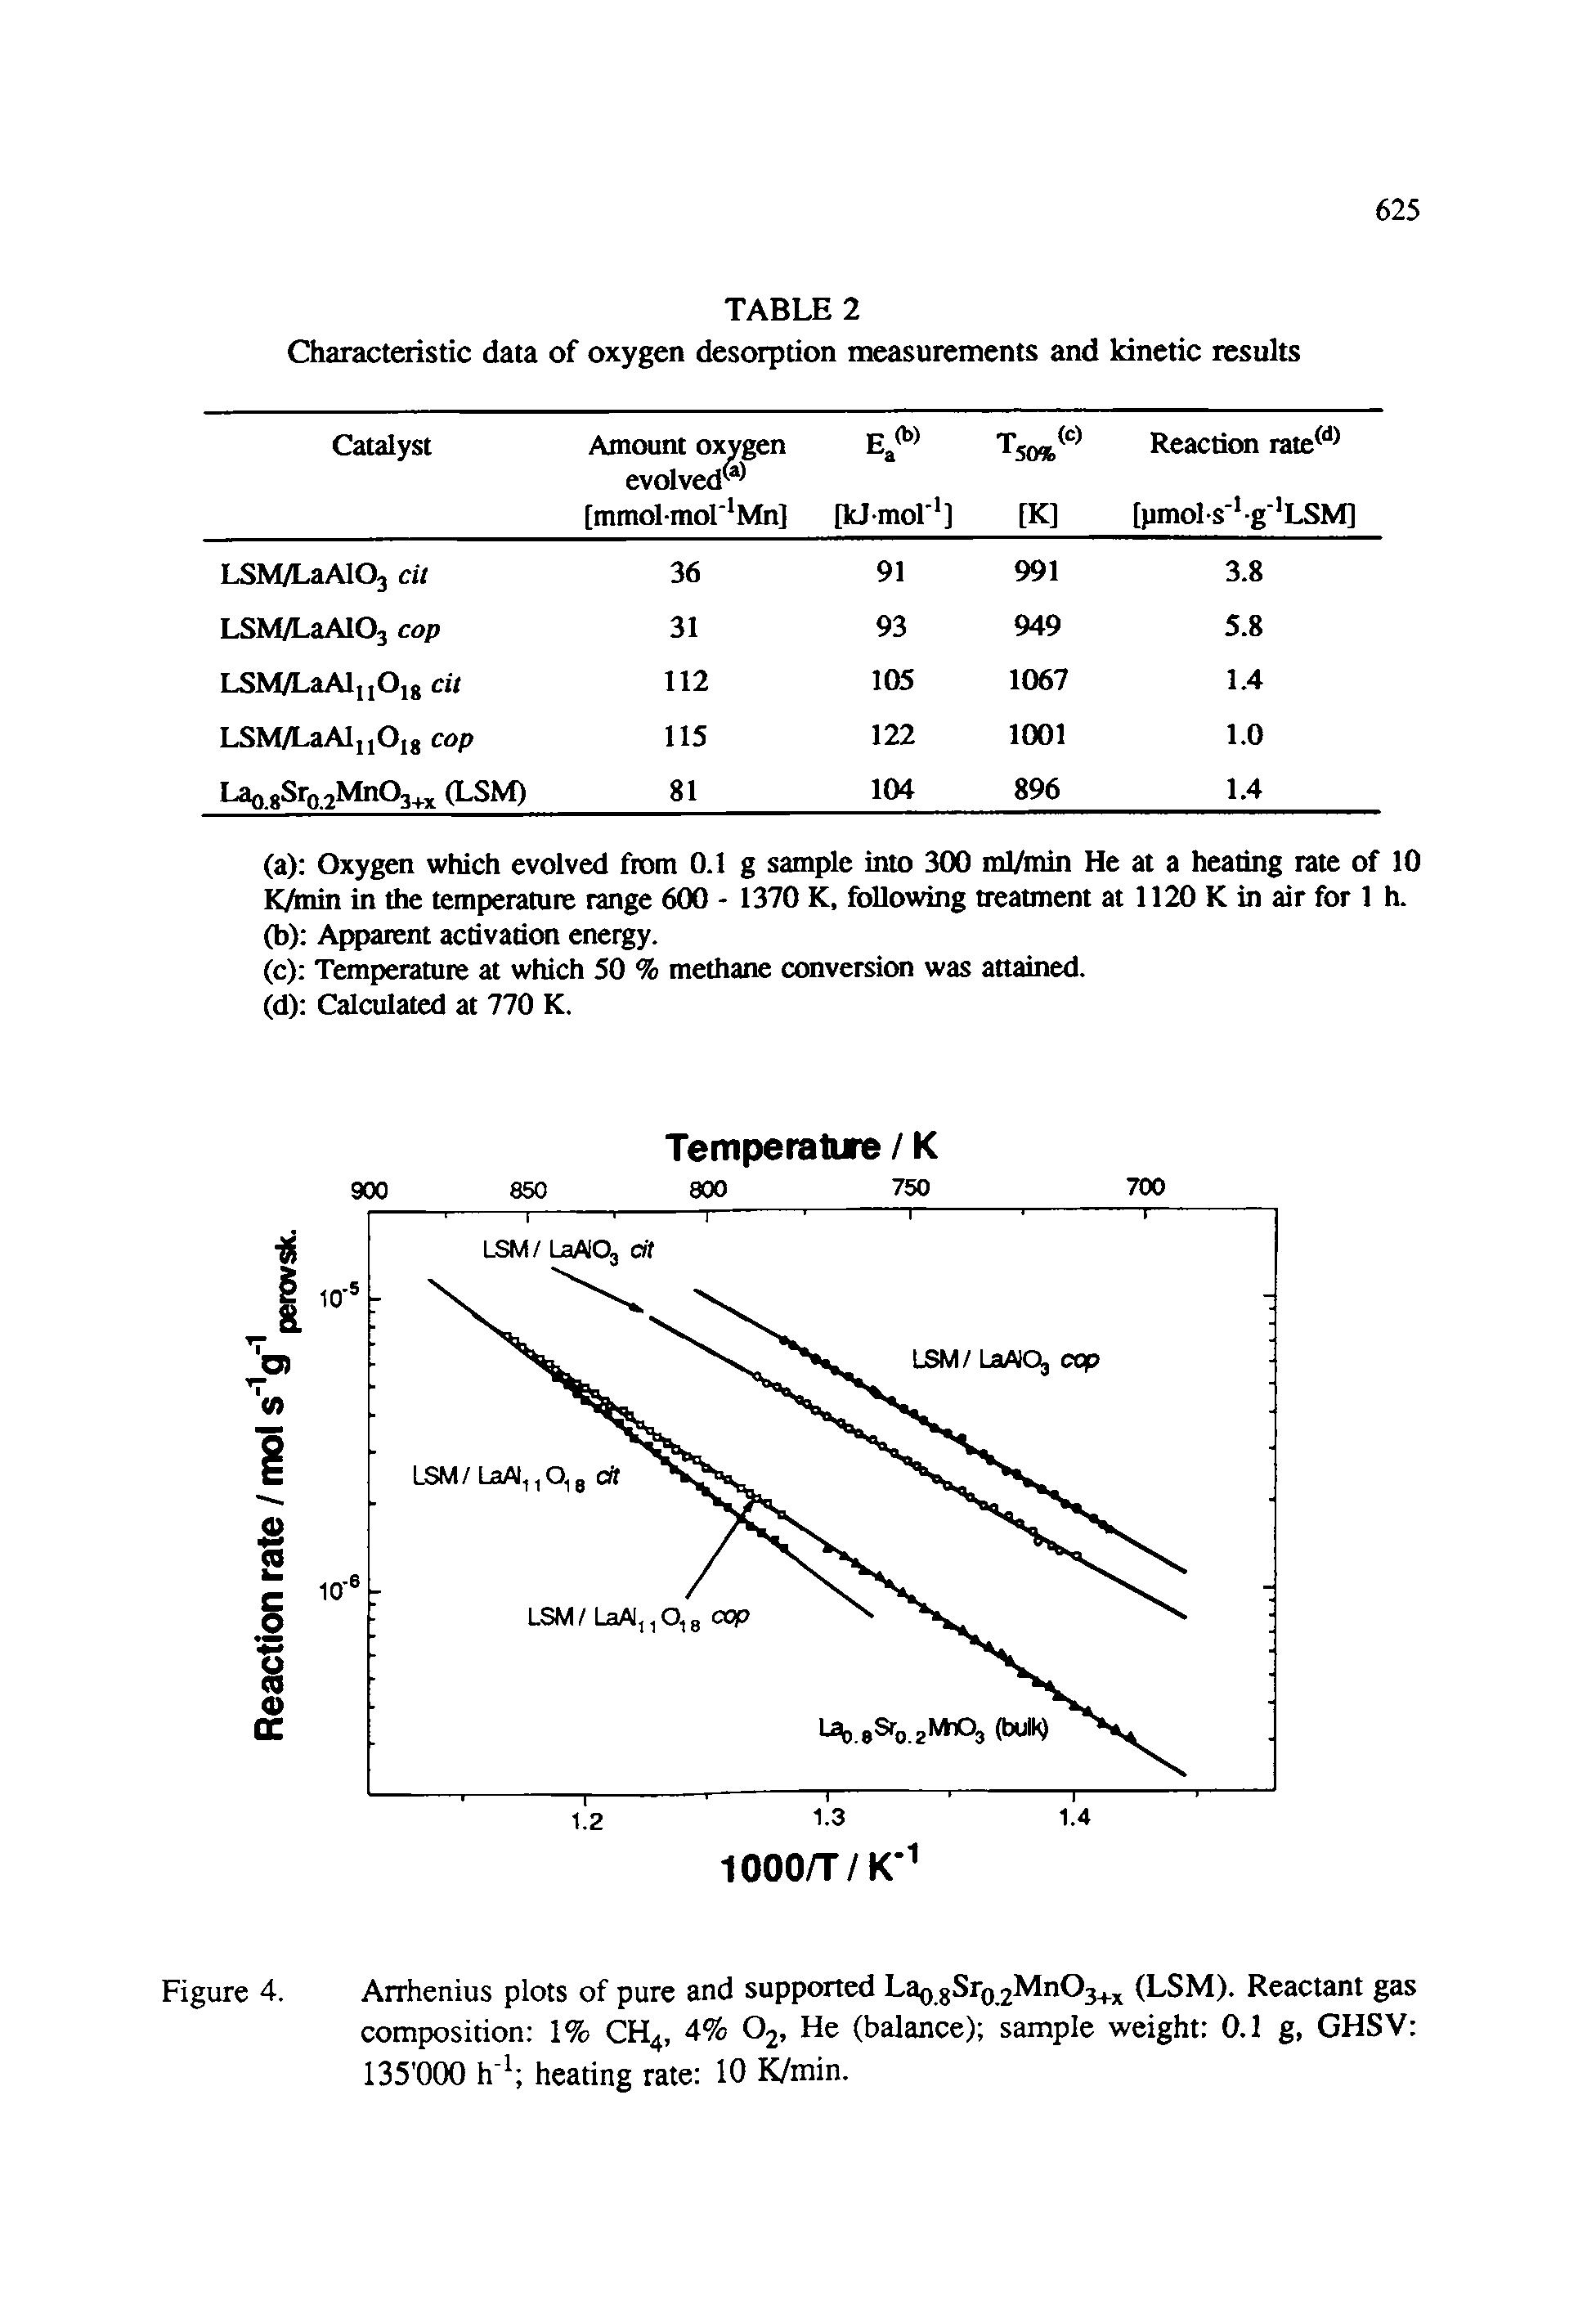 Figure 4. Arrhenius plots of pure and supported La gSrQ 2Mn03. (LSM). Reactant gas composition 1% CH4, 4% O2, He (balance) sample weight 0.1 g, GHSV 135 000 h heating rate 10 K/min.